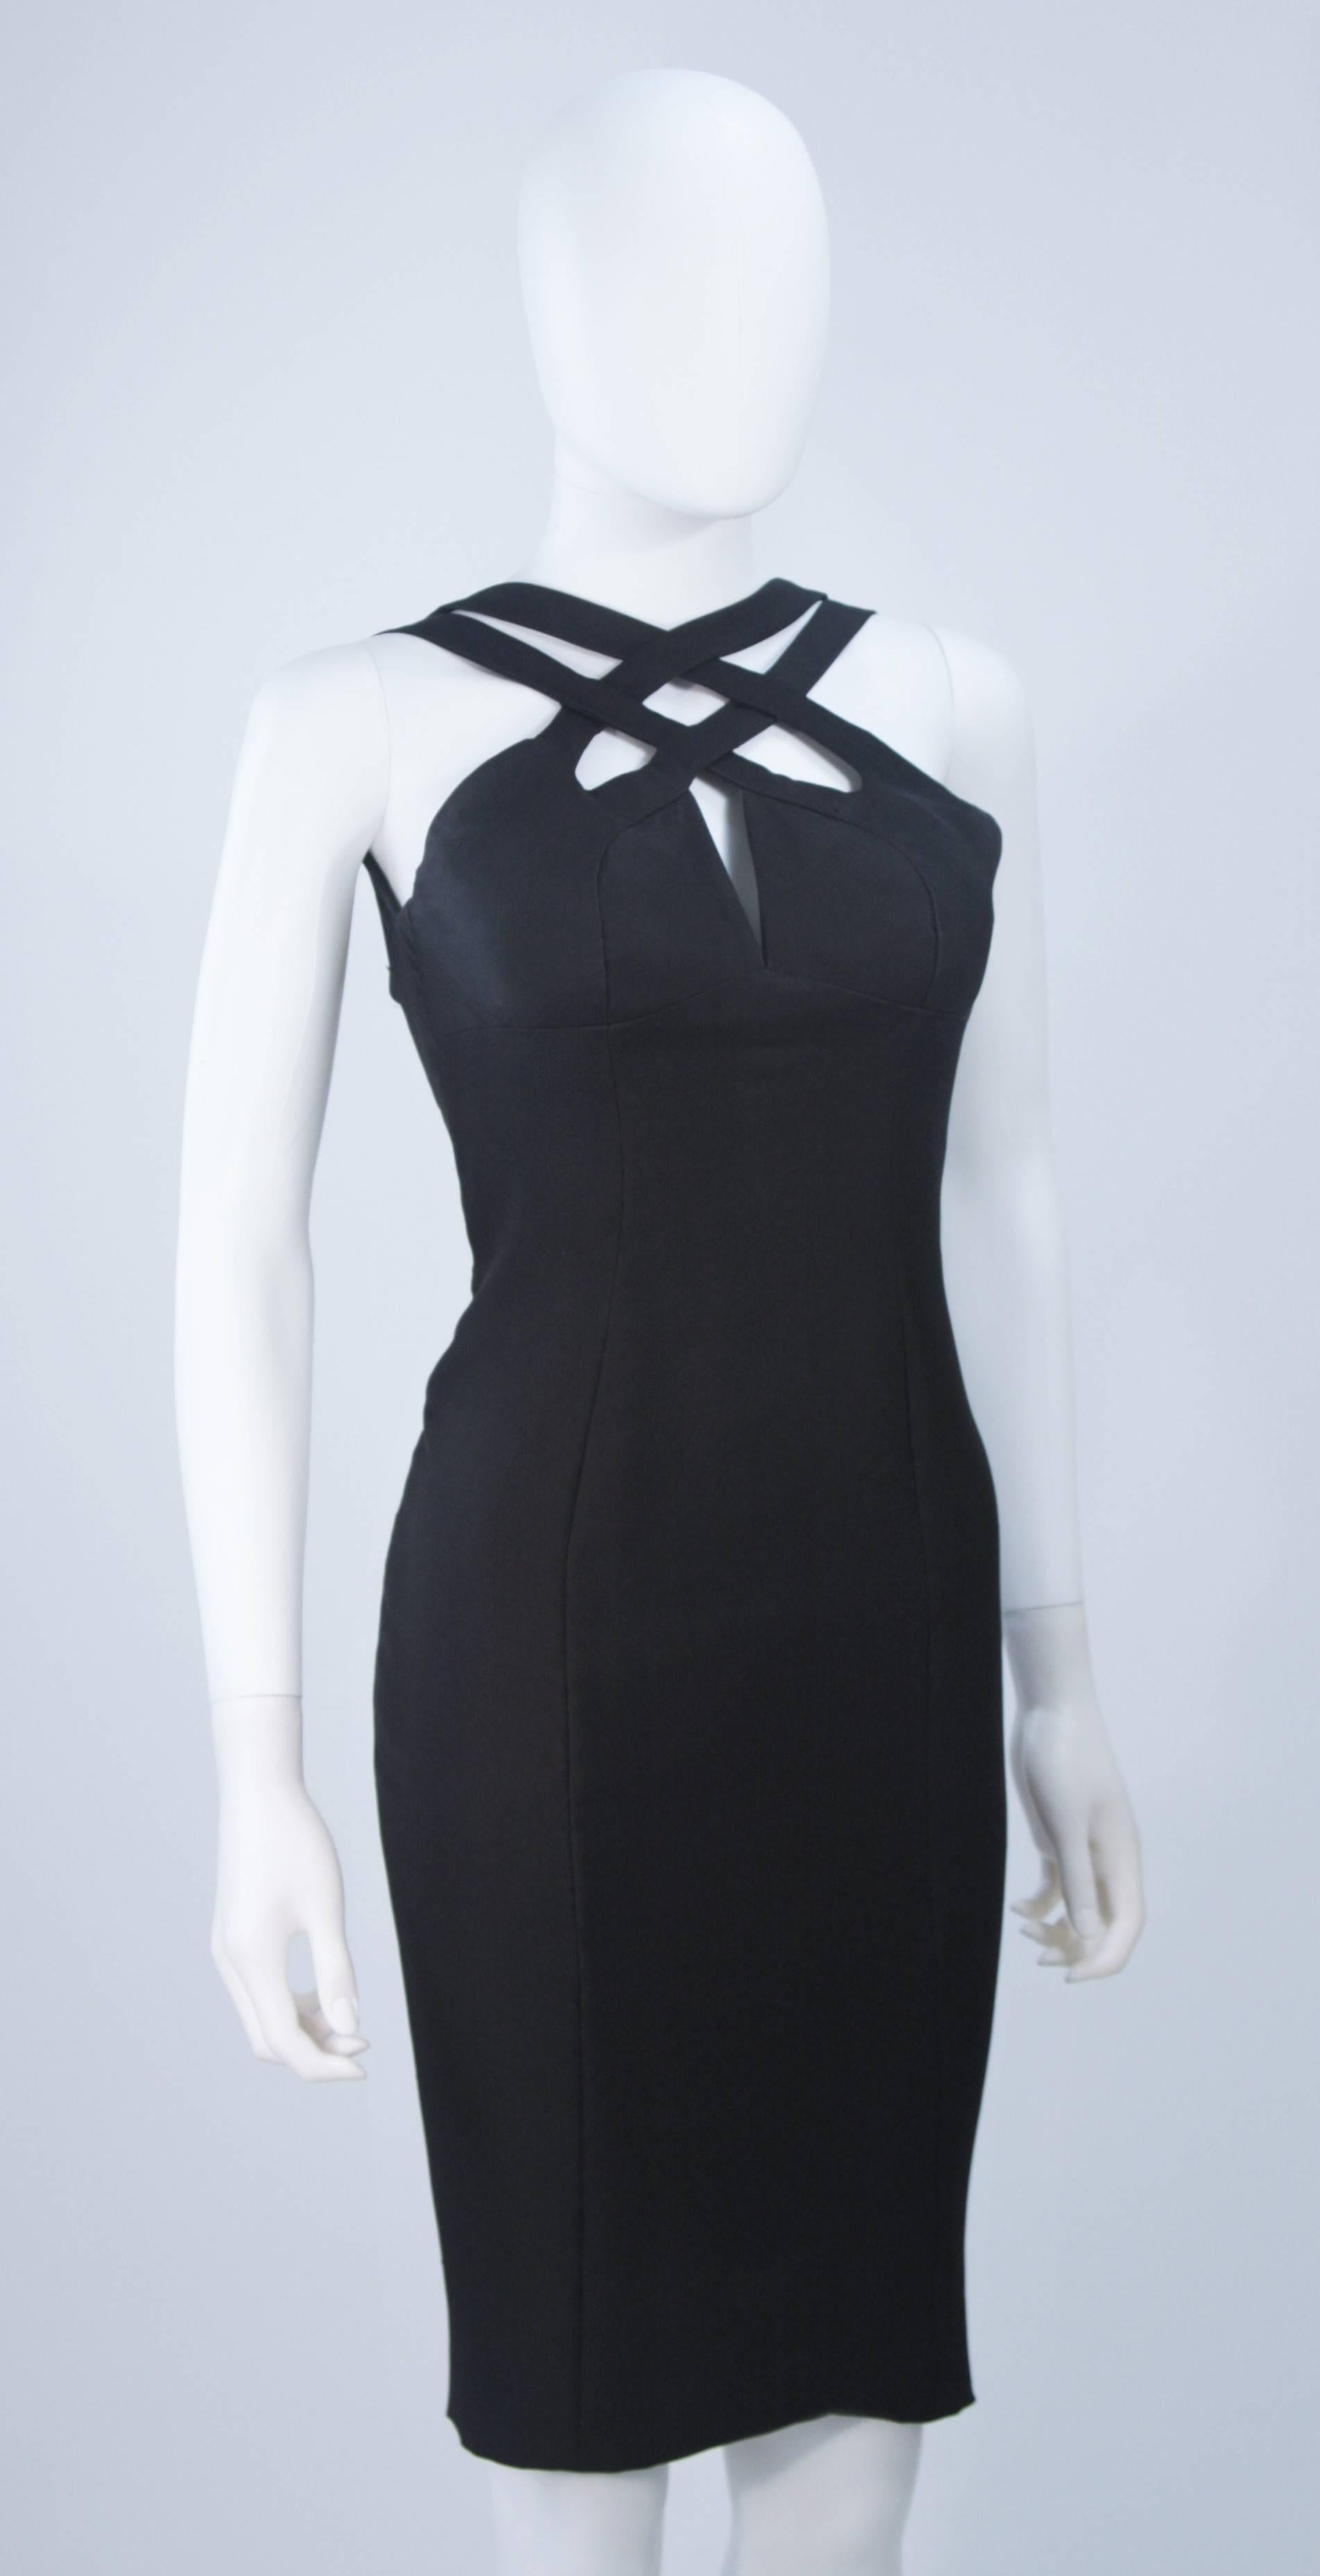 ELIZABETH MASON COUTURE Silk Criss Cross Cocktail Dress Size 2 Made to ...